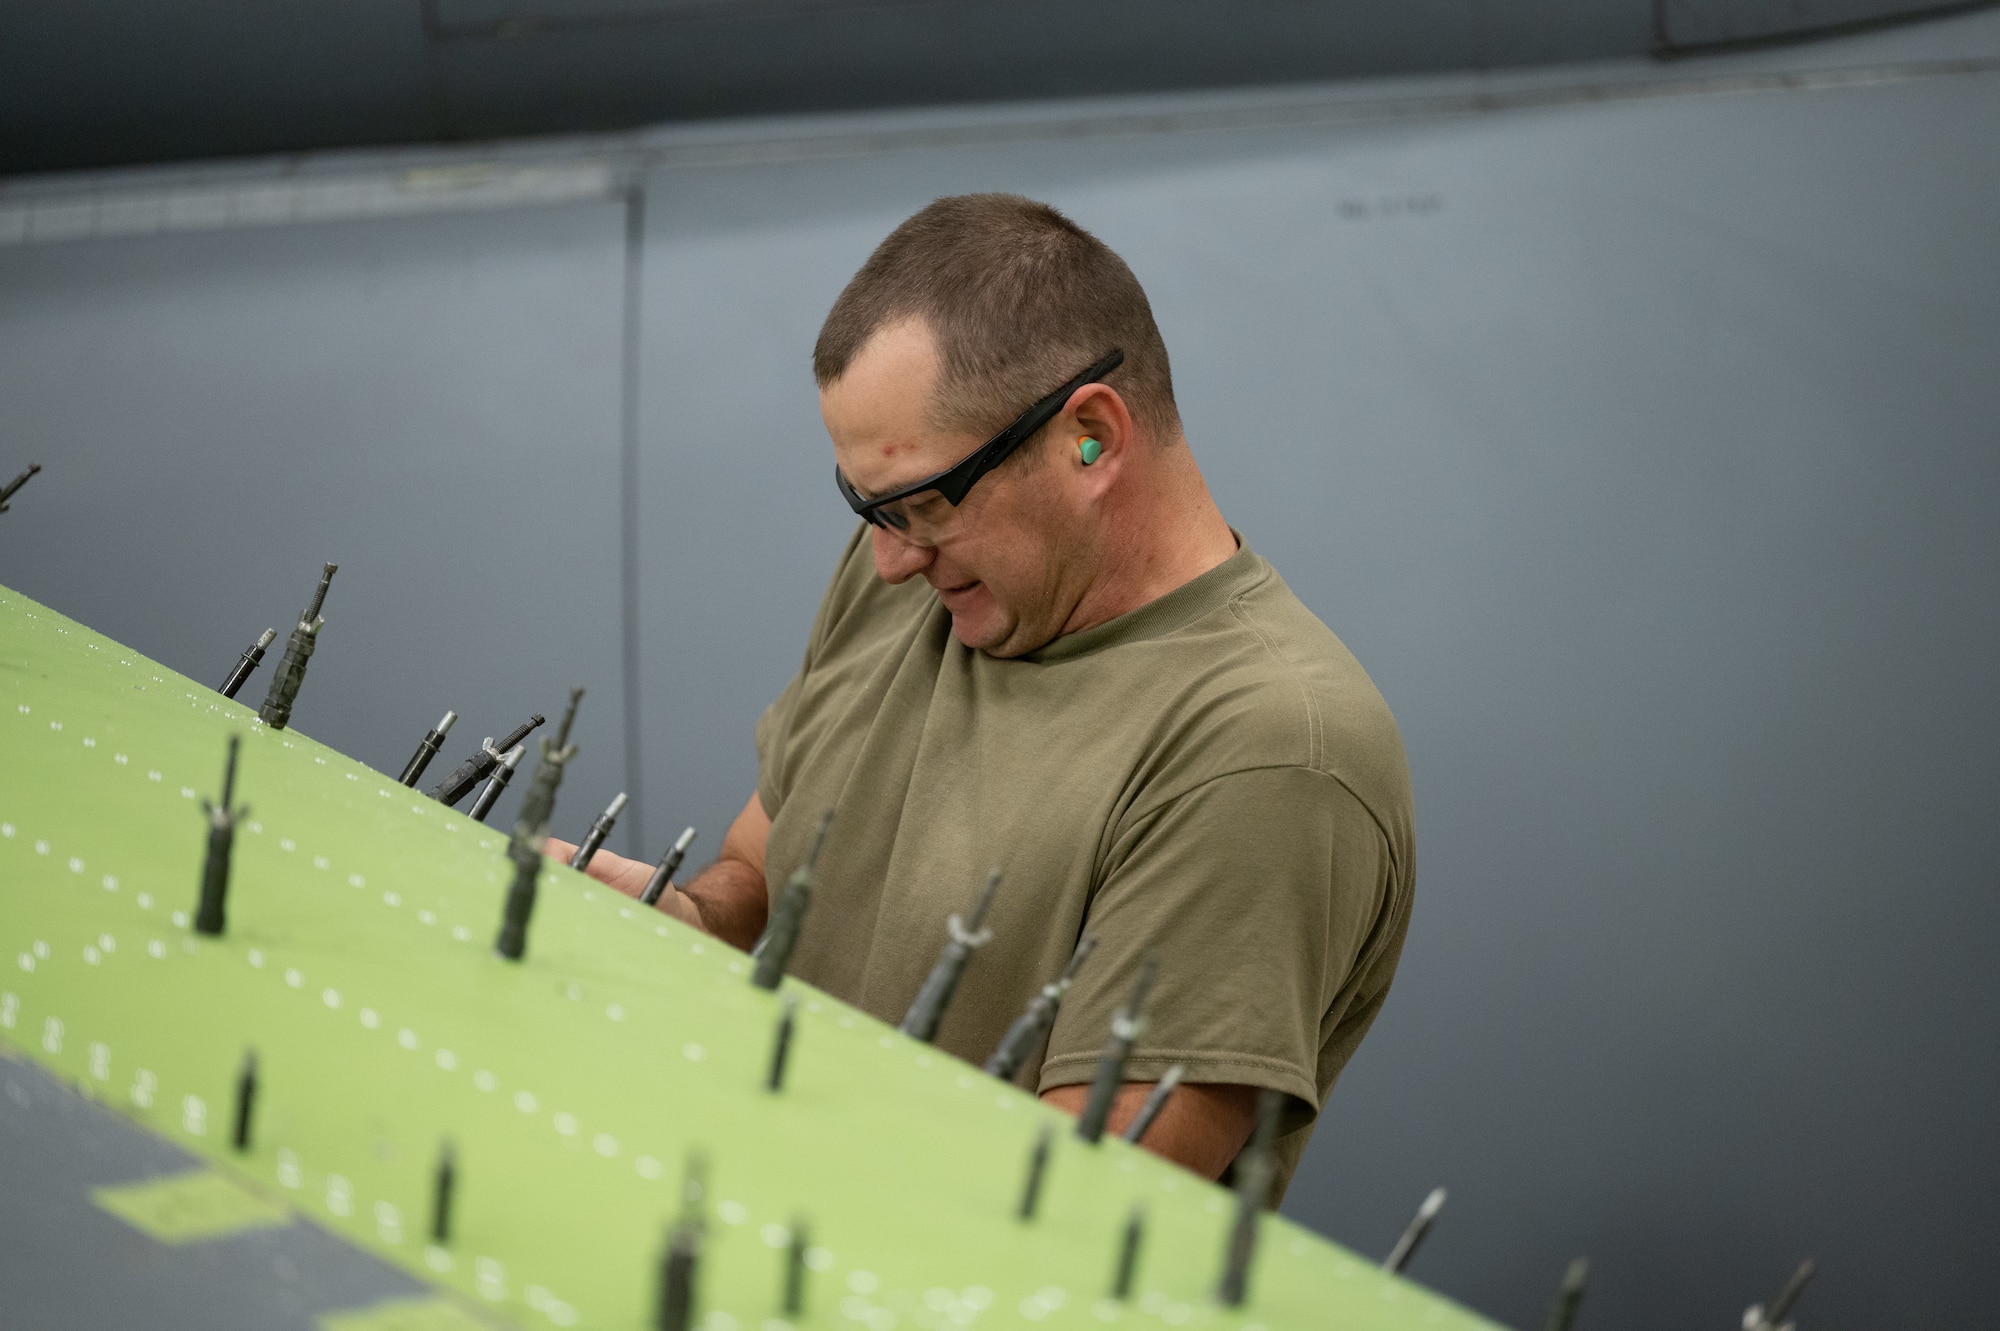 Master Sgt. Jacob Harrington, 434th Maintenance Squadron aircraft structural maintenance journeyman, works on the substructure of a KC-135R Stratotanker’s wing. The foreground shows the wing's substructure, a bright green, and Harrington in the background, conducting the repair with a tool. He is wearing safety glasses and ear plugs.